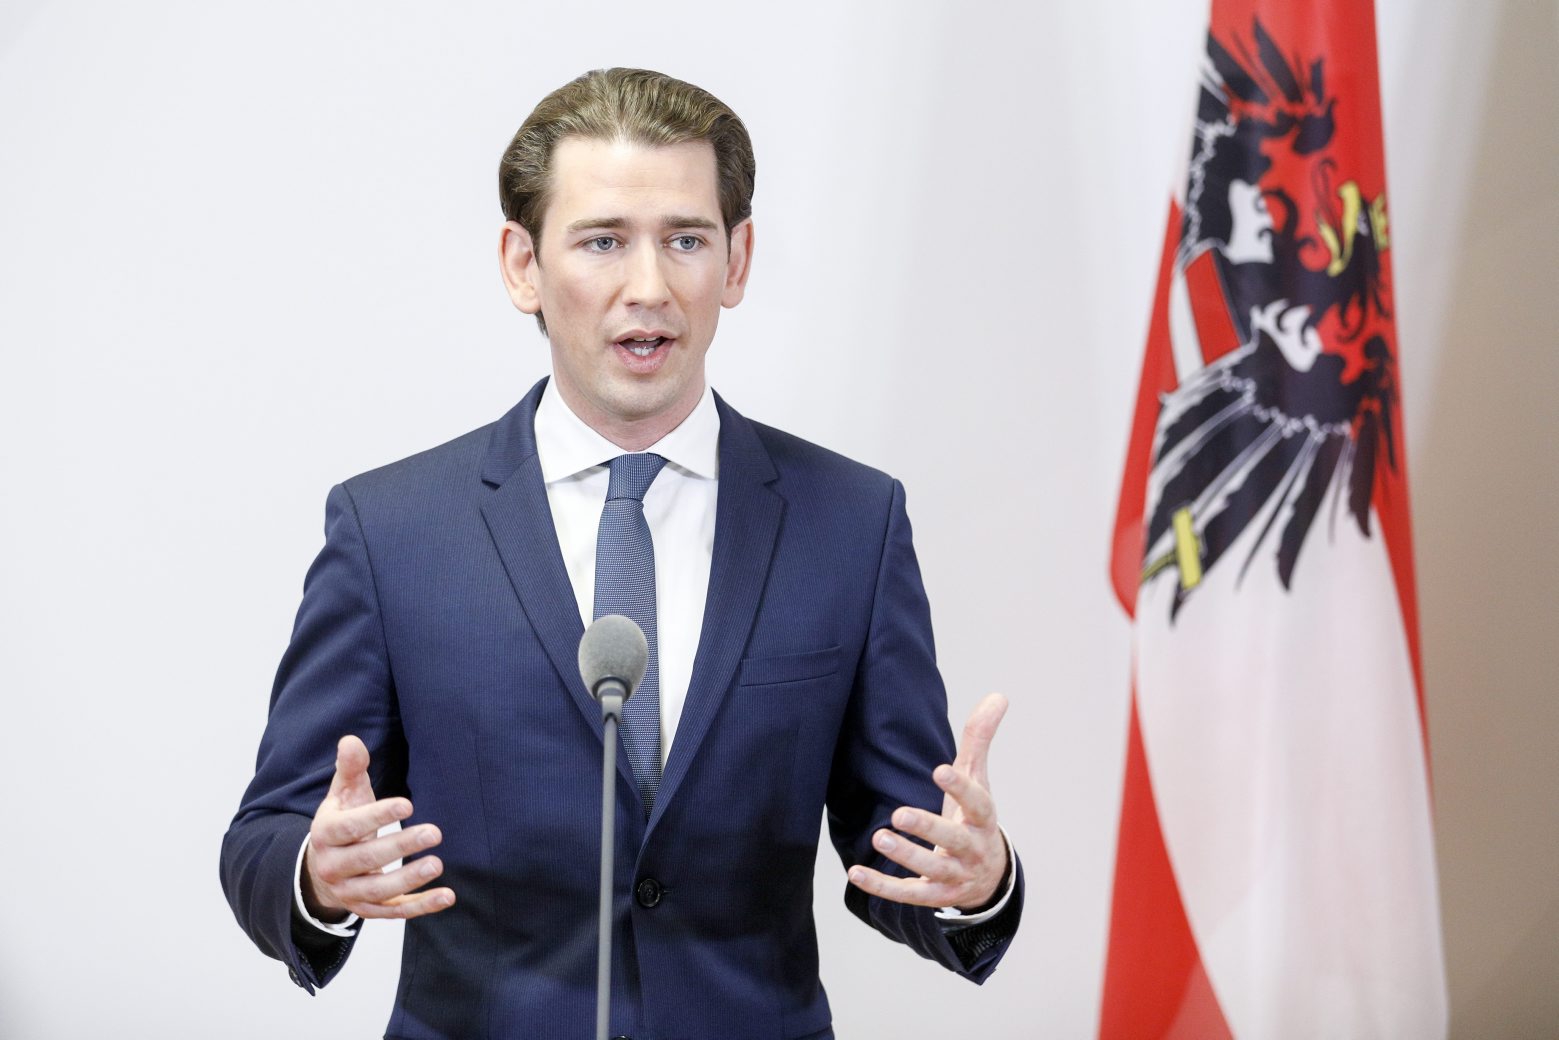 epa08098286 Leader of Austrian People's Party (OeVP), Sebastian Kurz speaks during a press statement next to Leader of the Austrian Green Party, Werner Kogler after coalition negotiations for a new Austrian government at the Winter Palace of Prince Eugene in Vienna, Austria, 01 January 2020. Kurz and Kogler agree on a coalition of the OeVP and the Green Party. Kurz and Kogler agree on a coalition of the OeVP an the Green Party to form a new government.  EPA/FLORIAN WIESER AUSTRIA GOVERNMENT